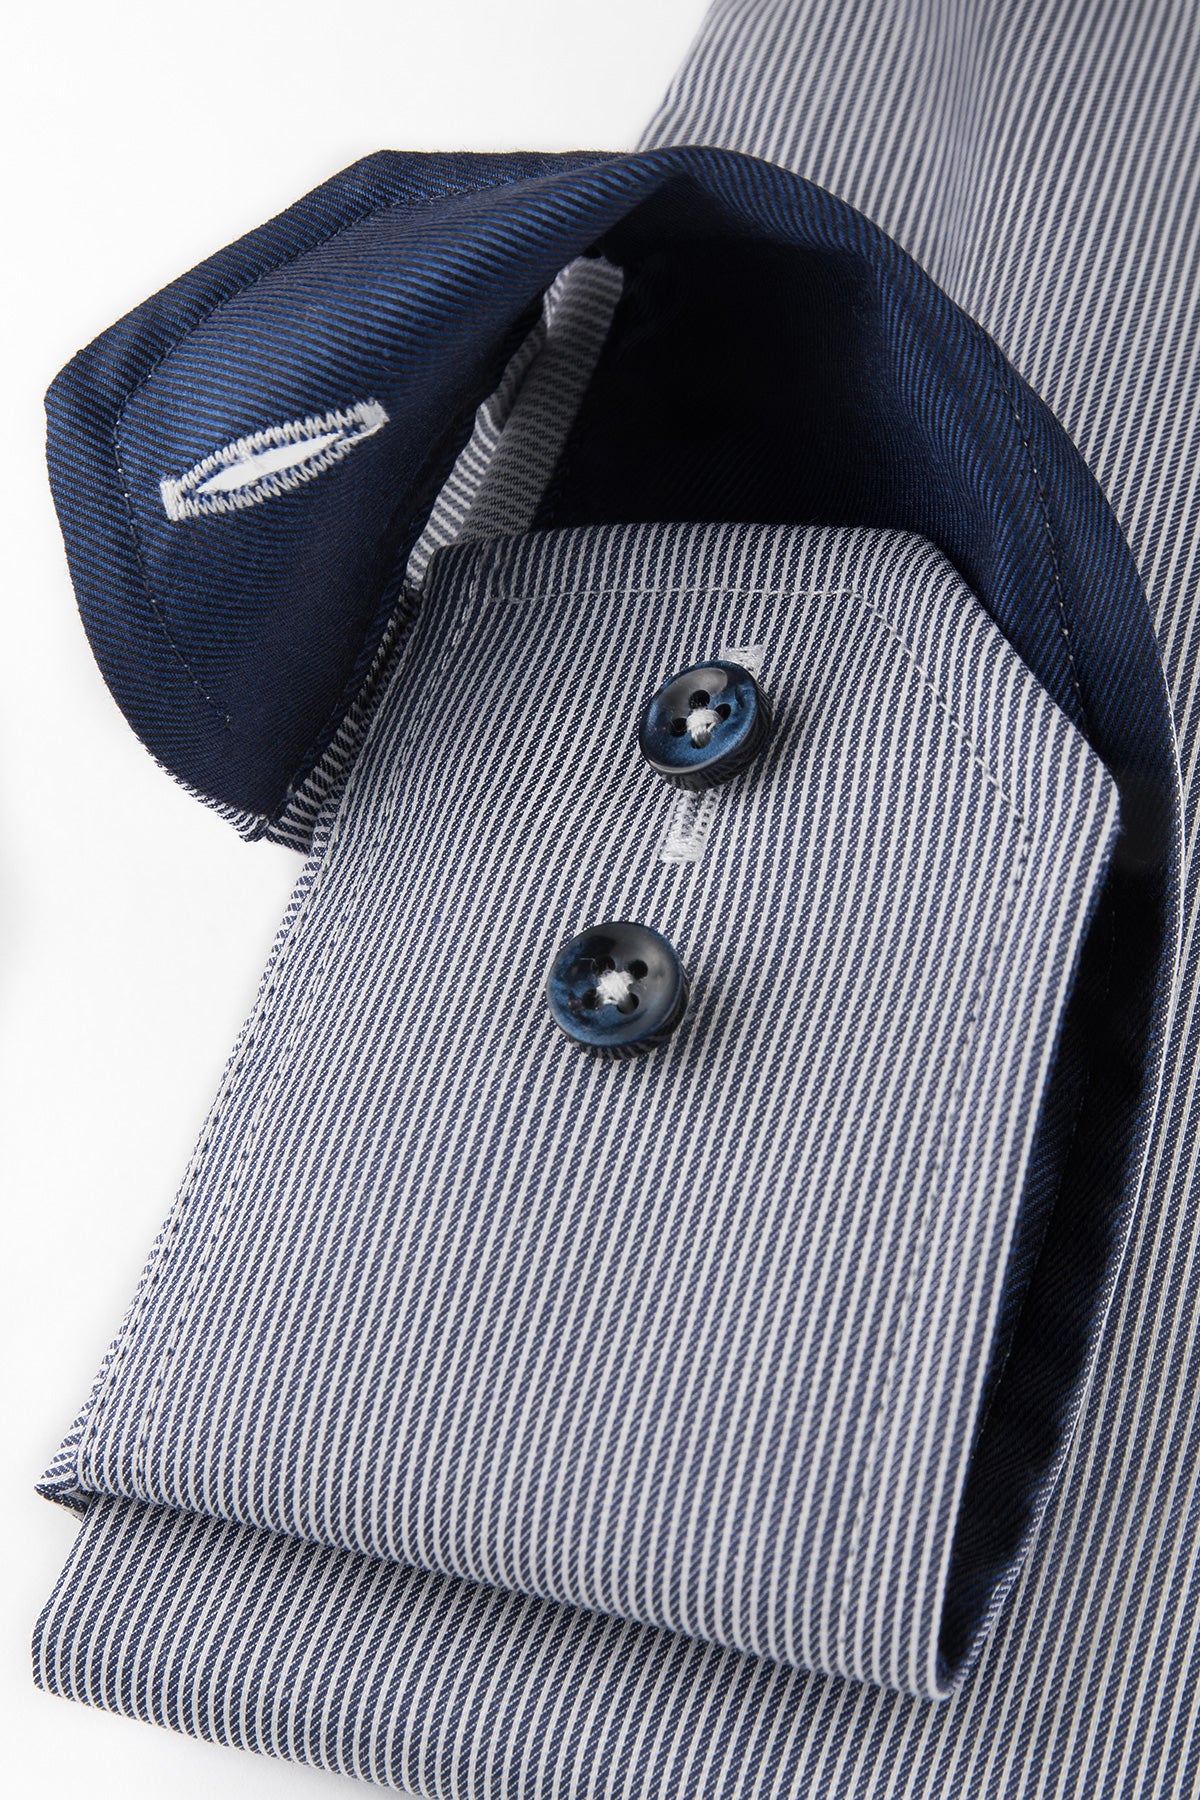 Blue striped regular fit shirt with contrast details